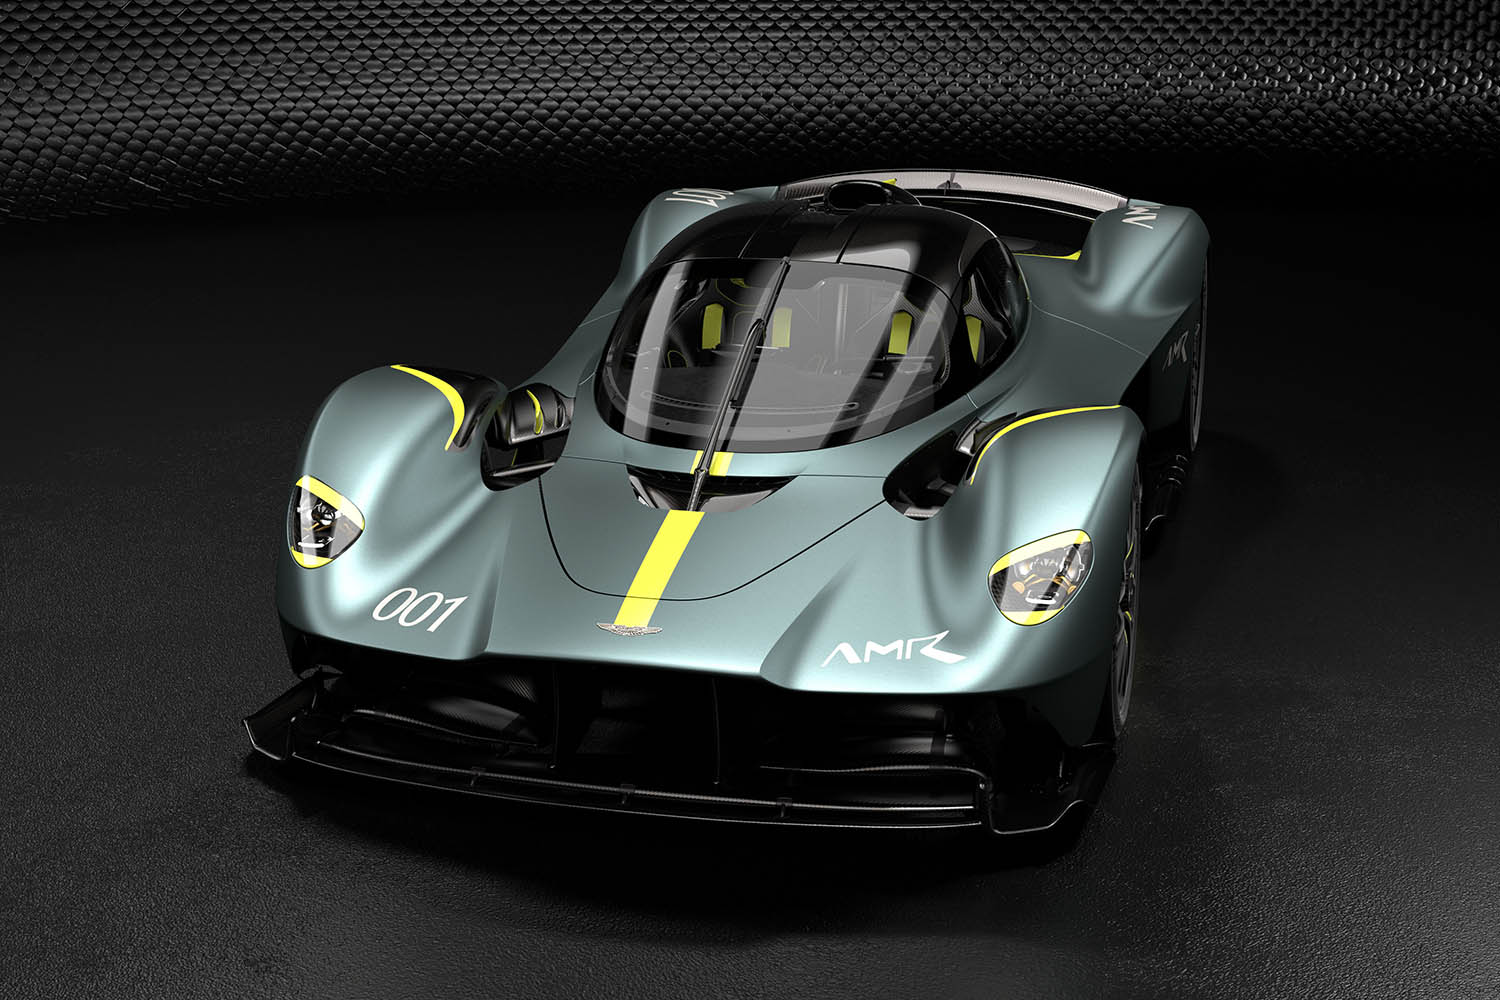 Aston Martin Valkyrie with AMR Track Performance Pack - Stirling Green and Lime livery (1).jpg